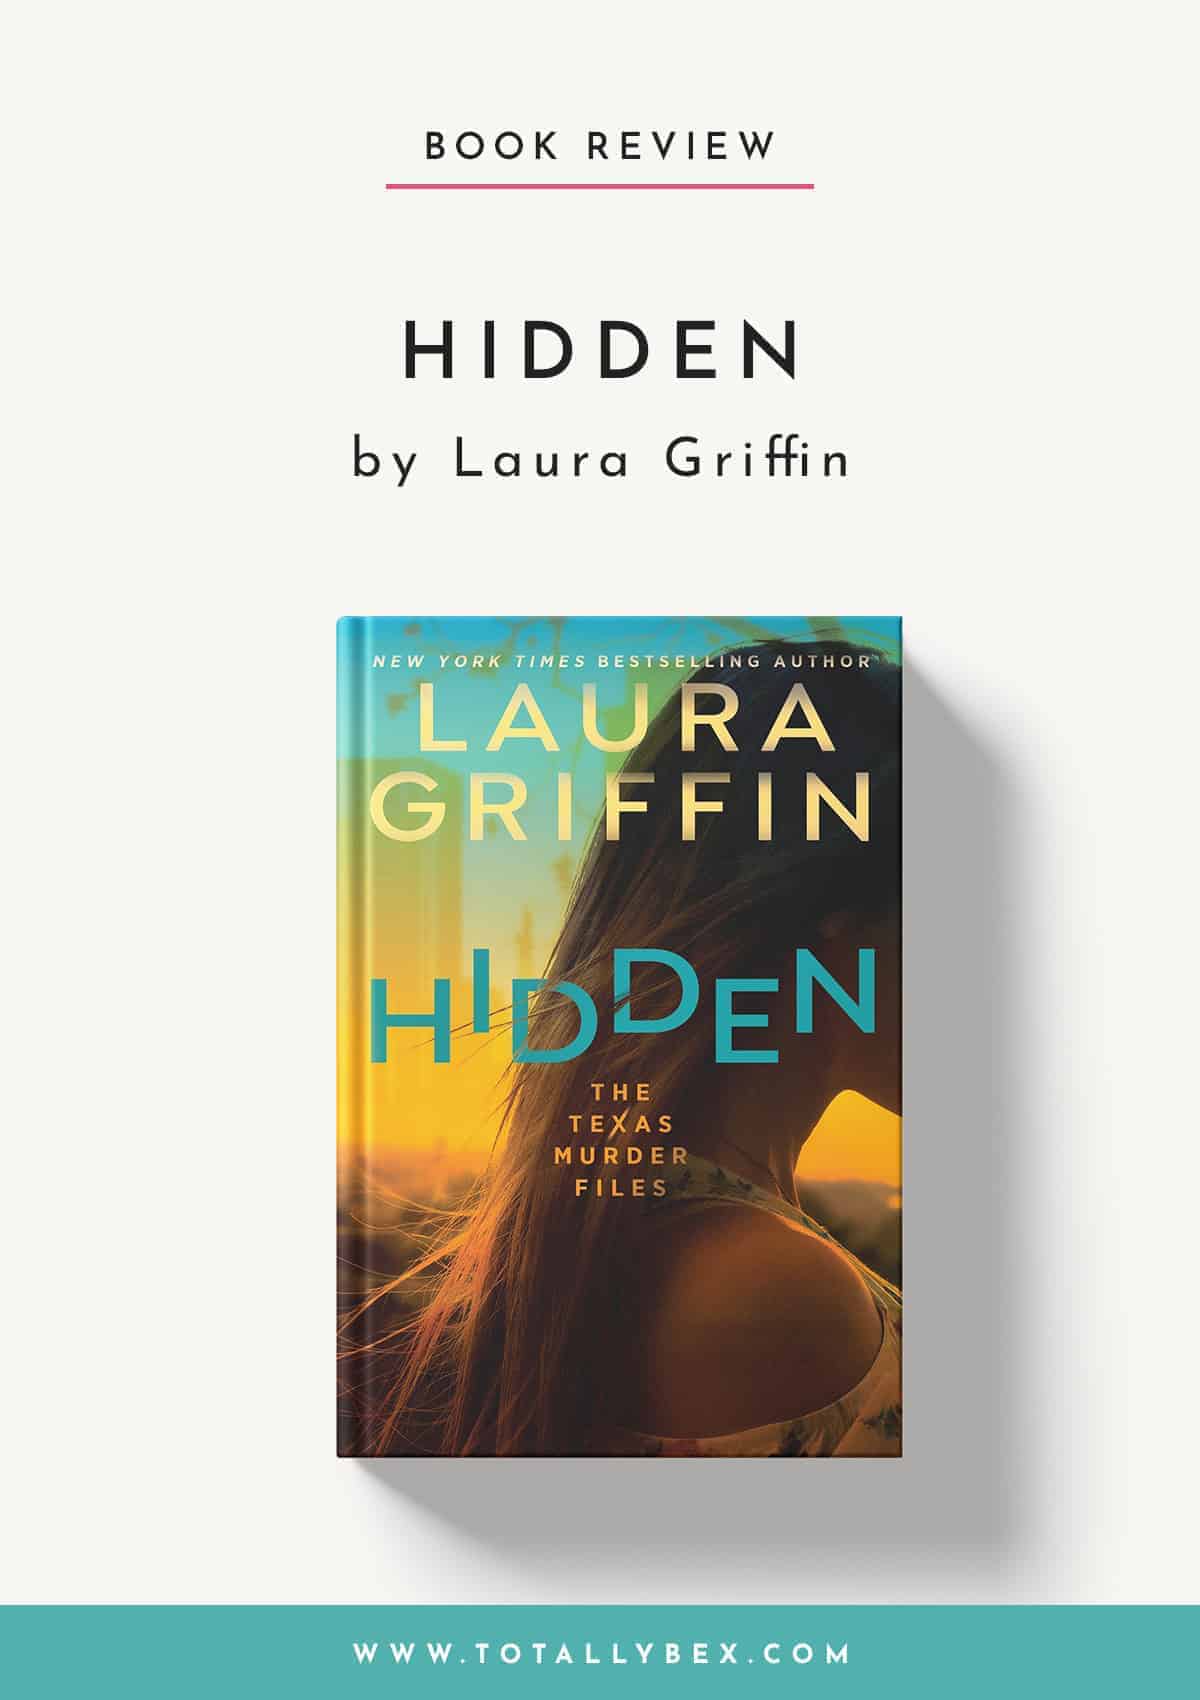 The first book of the new Texas Murder Files series, Hidden by Laura Griffin, is a fast-paced murder mystery with romance and a storyline that will keep you guessing until the end!